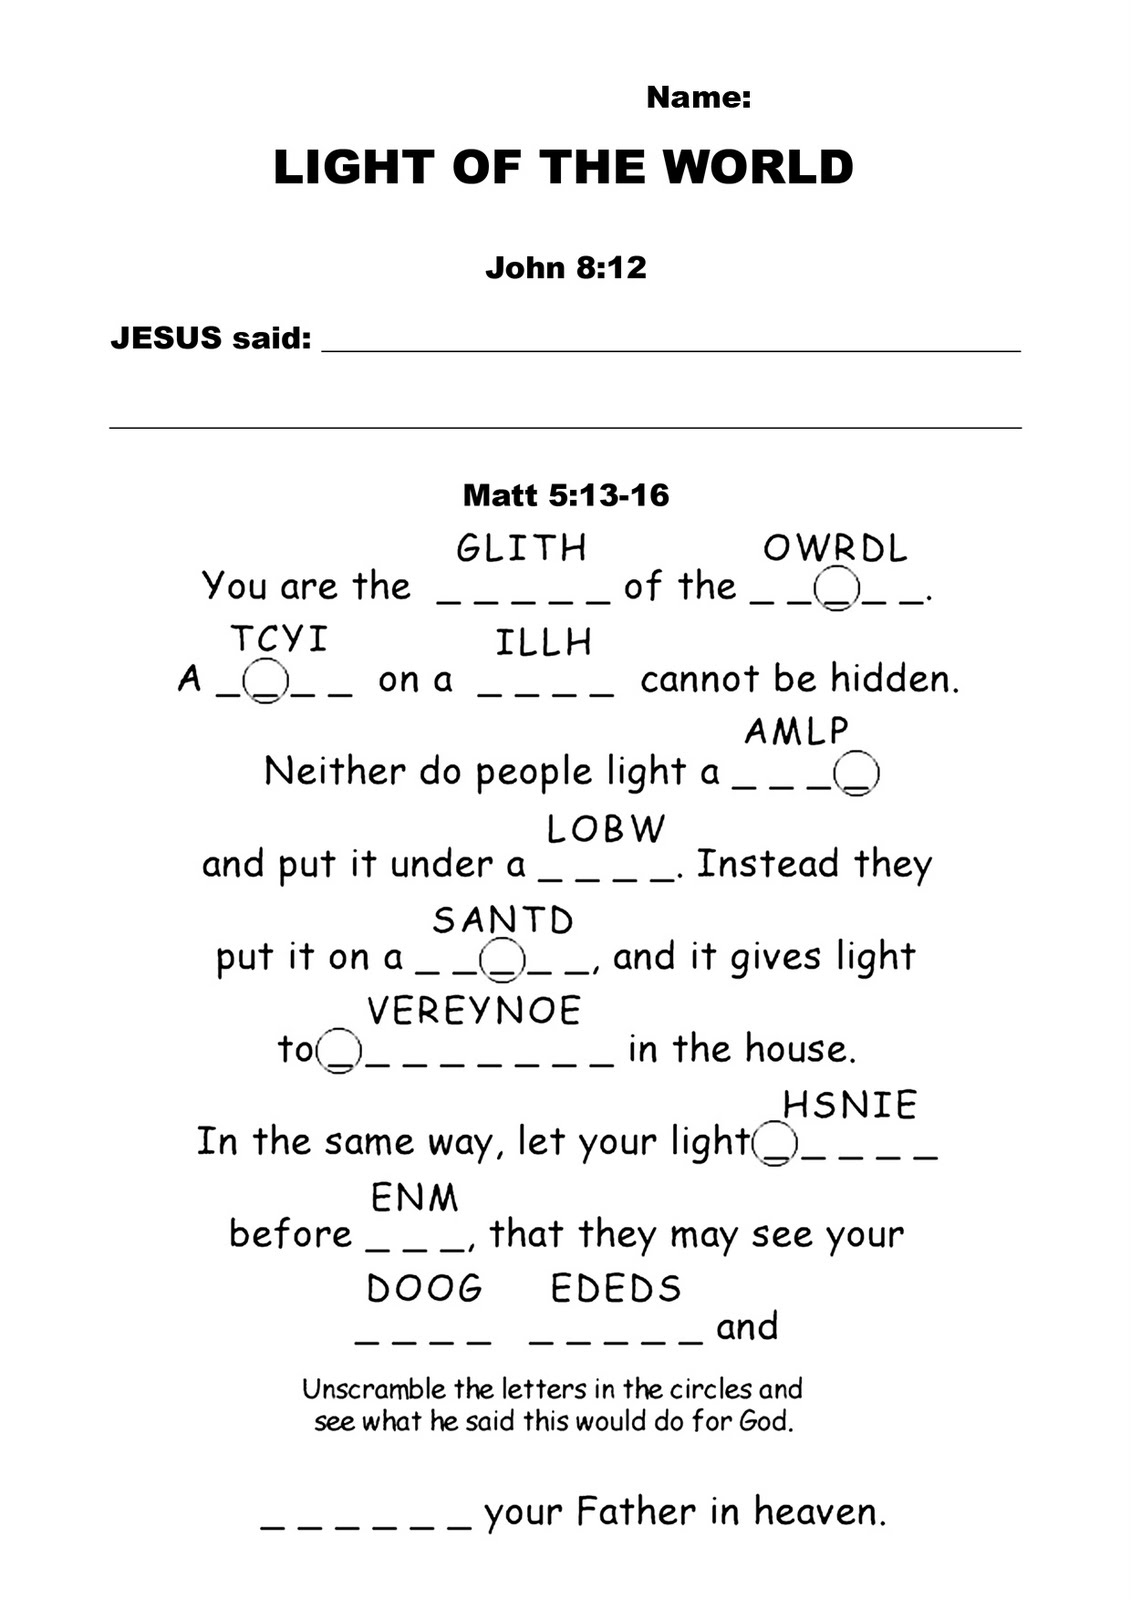 12 Best Images of Bible Activity Worksheets - Printable ...